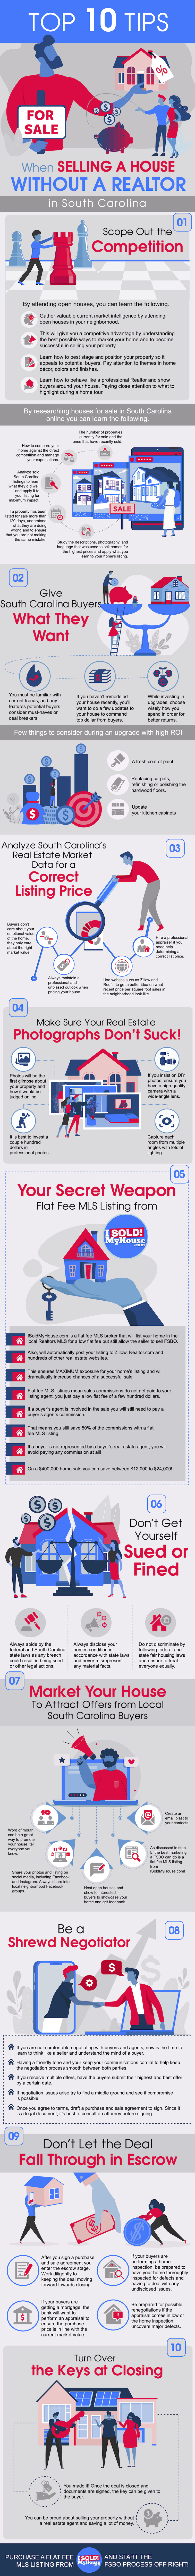 infographic of the 10 steps to sell a house in south carolina without an agent